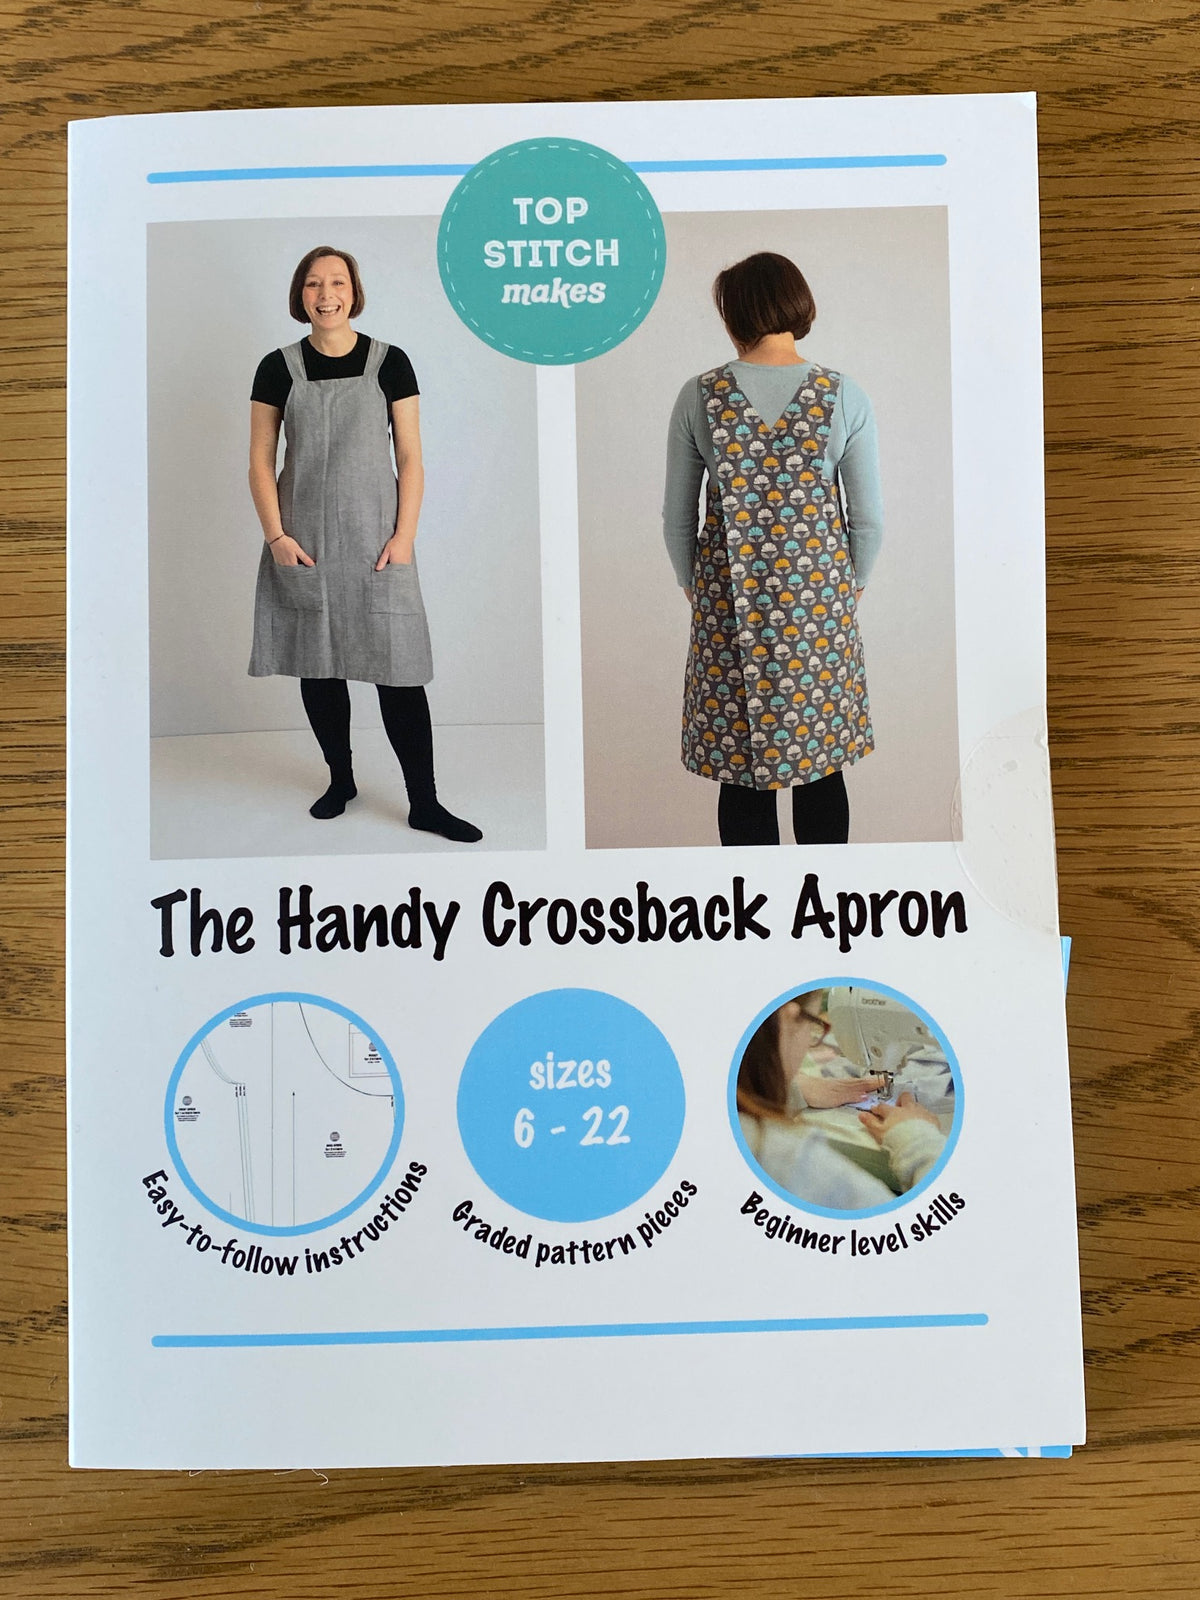 Top Stitch Makes - The Handy Crossback Apron